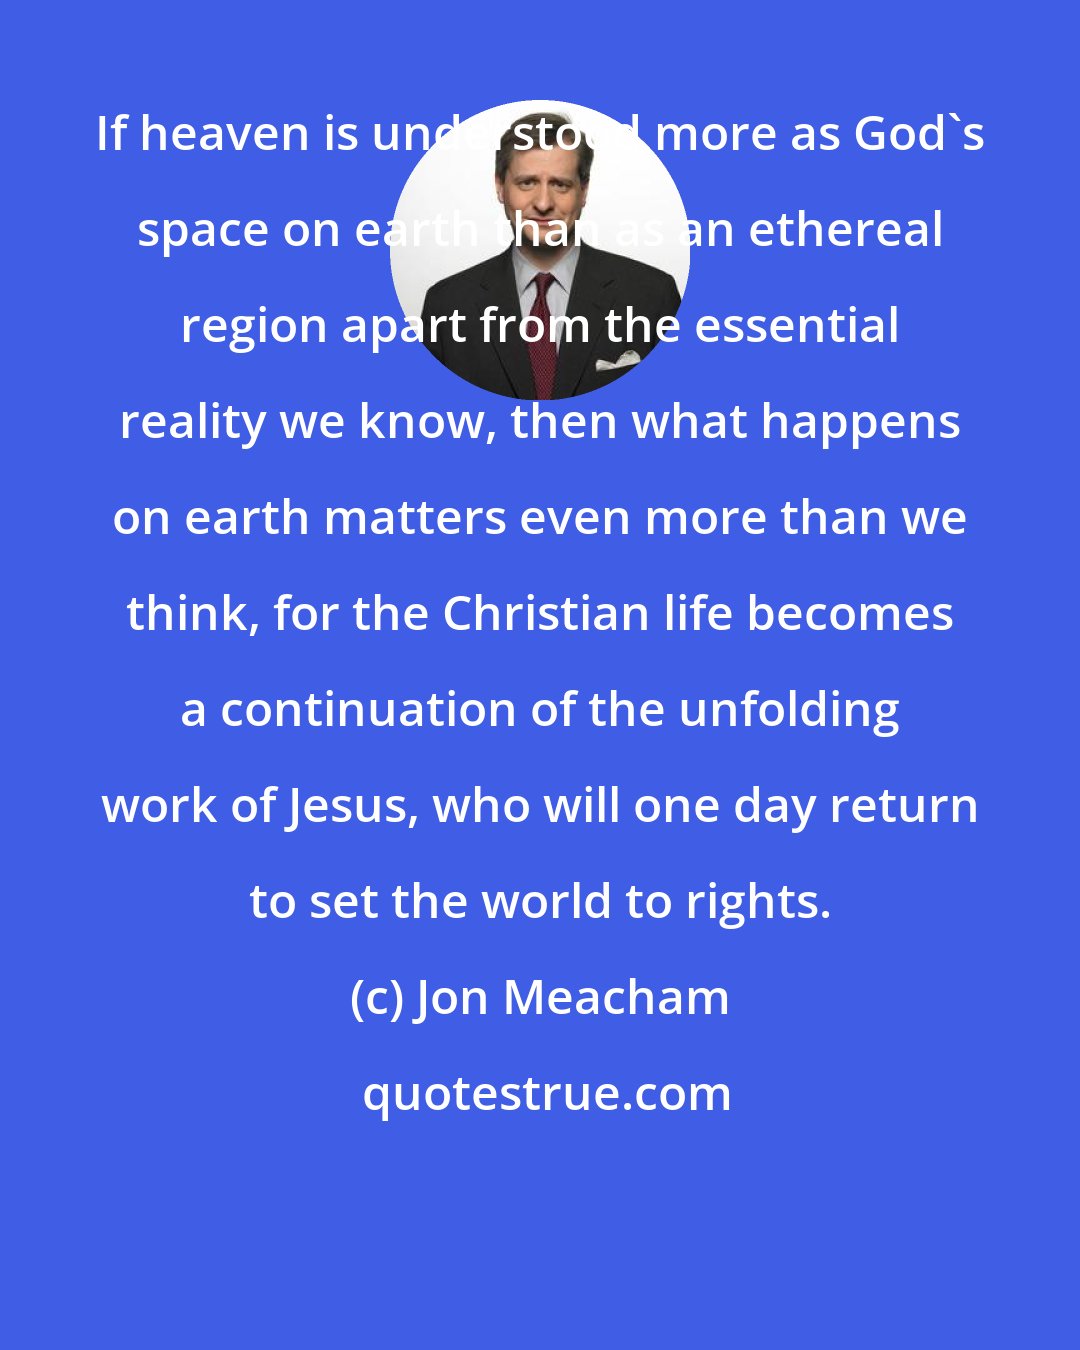 Jon Meacham: If heaven is understood more as God's space on earth than as an ethereal region apart from the essential reality we know, then what happens on earth matters even more than we think, for the Christian life becomes a continuation of the unfolding work of Jesus, who will one day return to set the world to rights.